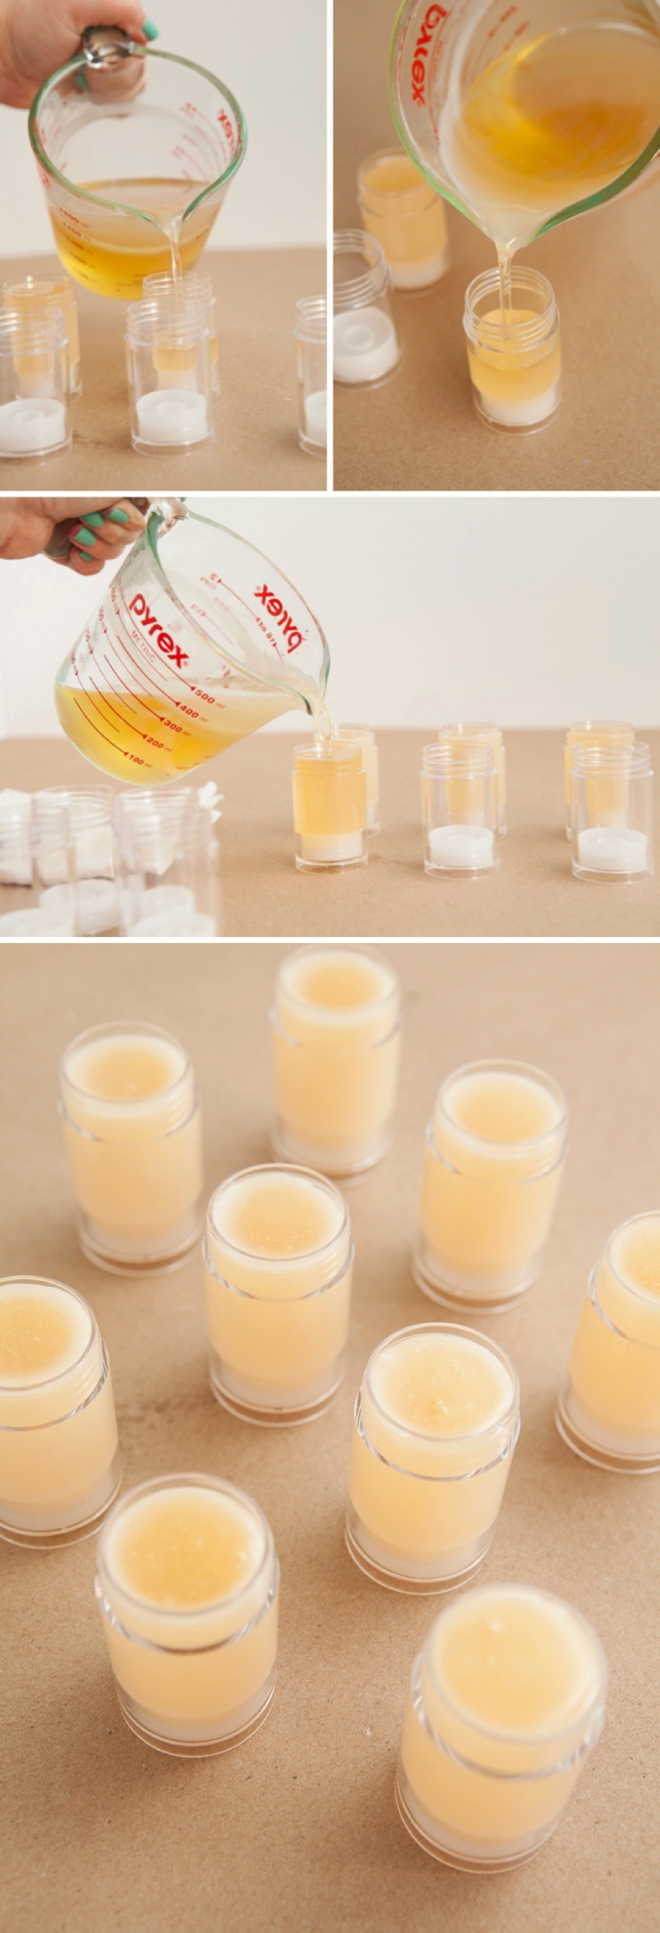 This tutorial shows you exactly how to make push-pop style lotion bars!